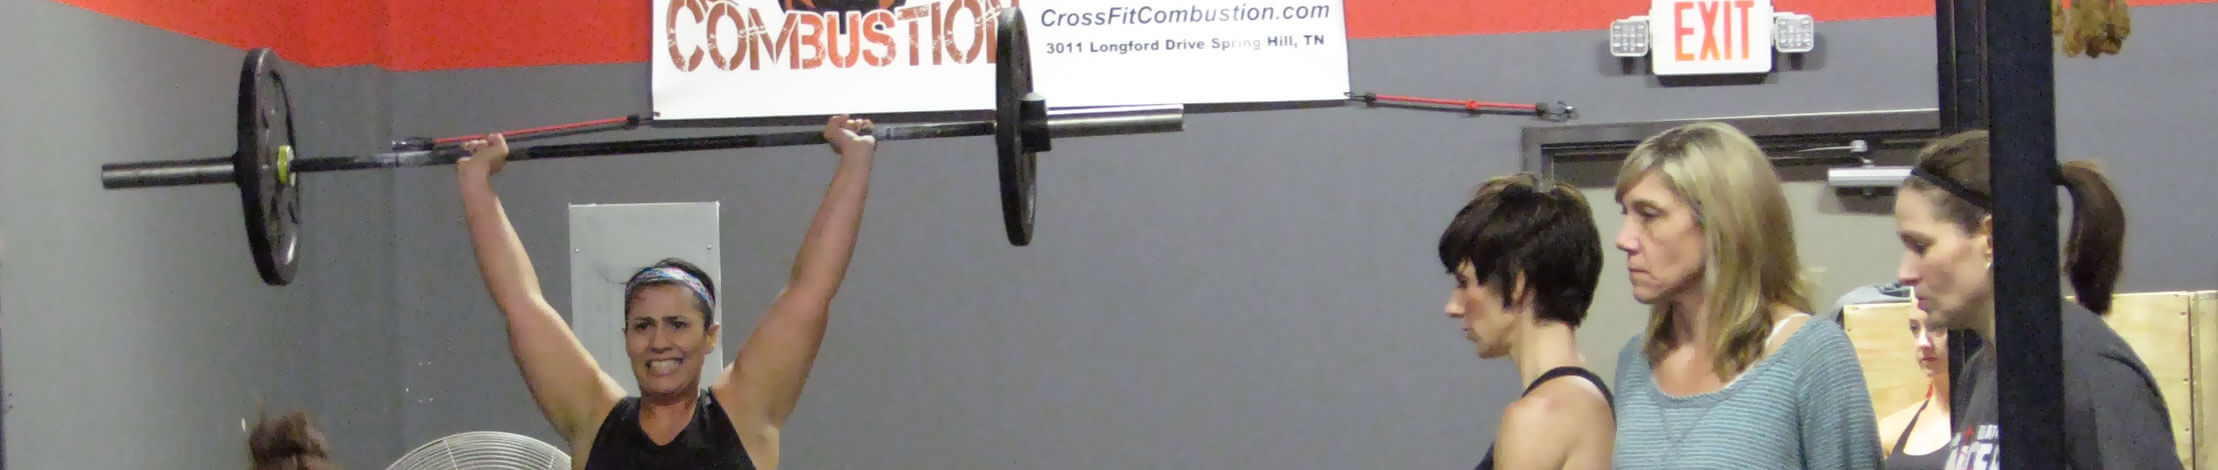 Crossfit Combustion Spring Hill Tn Forging Elite Fitness 5169